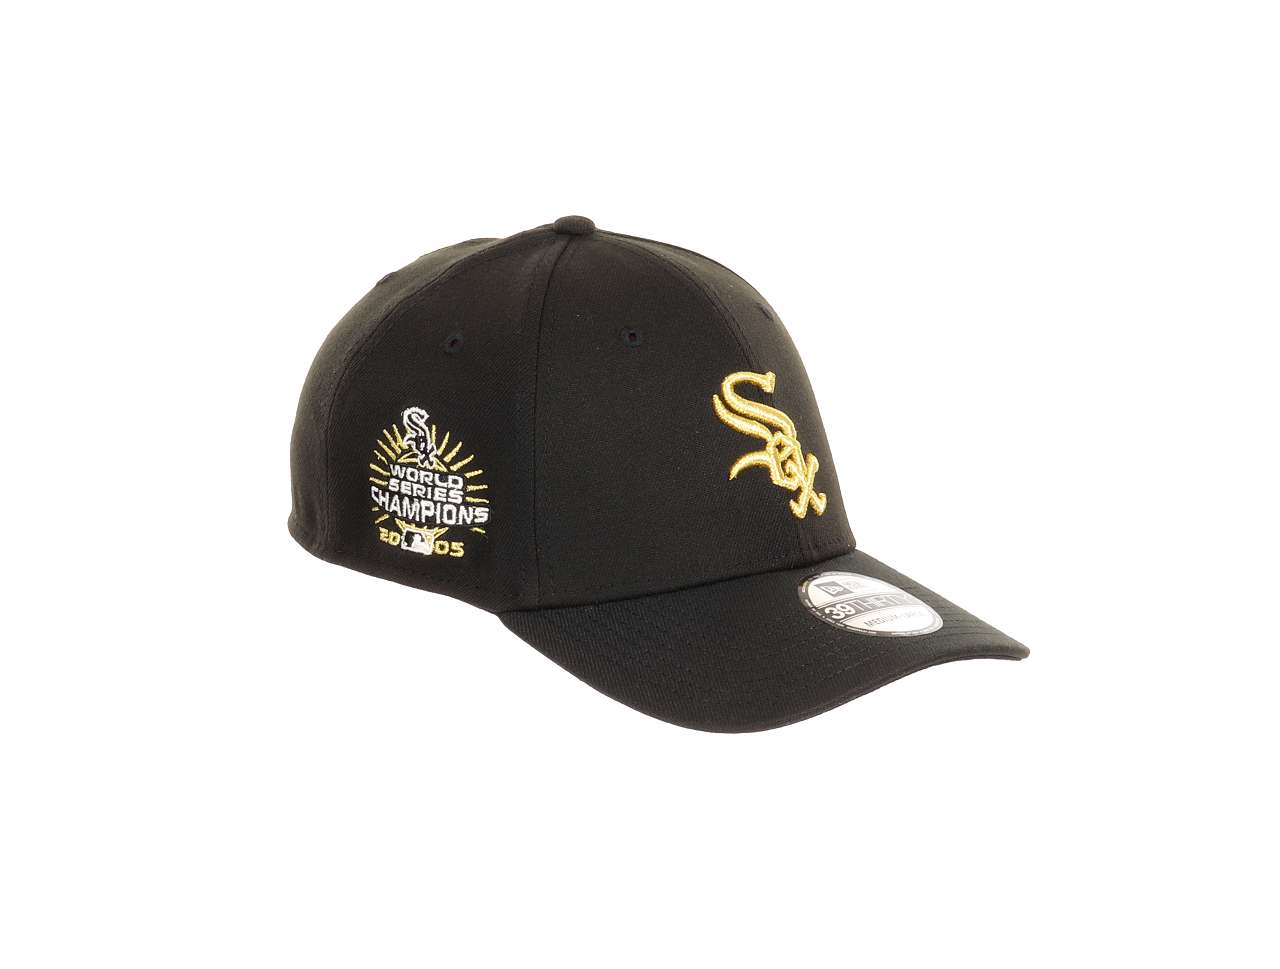 Chicago White Sox MLB World Series Chapions 2005 Sidepatch Cooperstown Black Gold 39Thirty Stretch Cap New Era